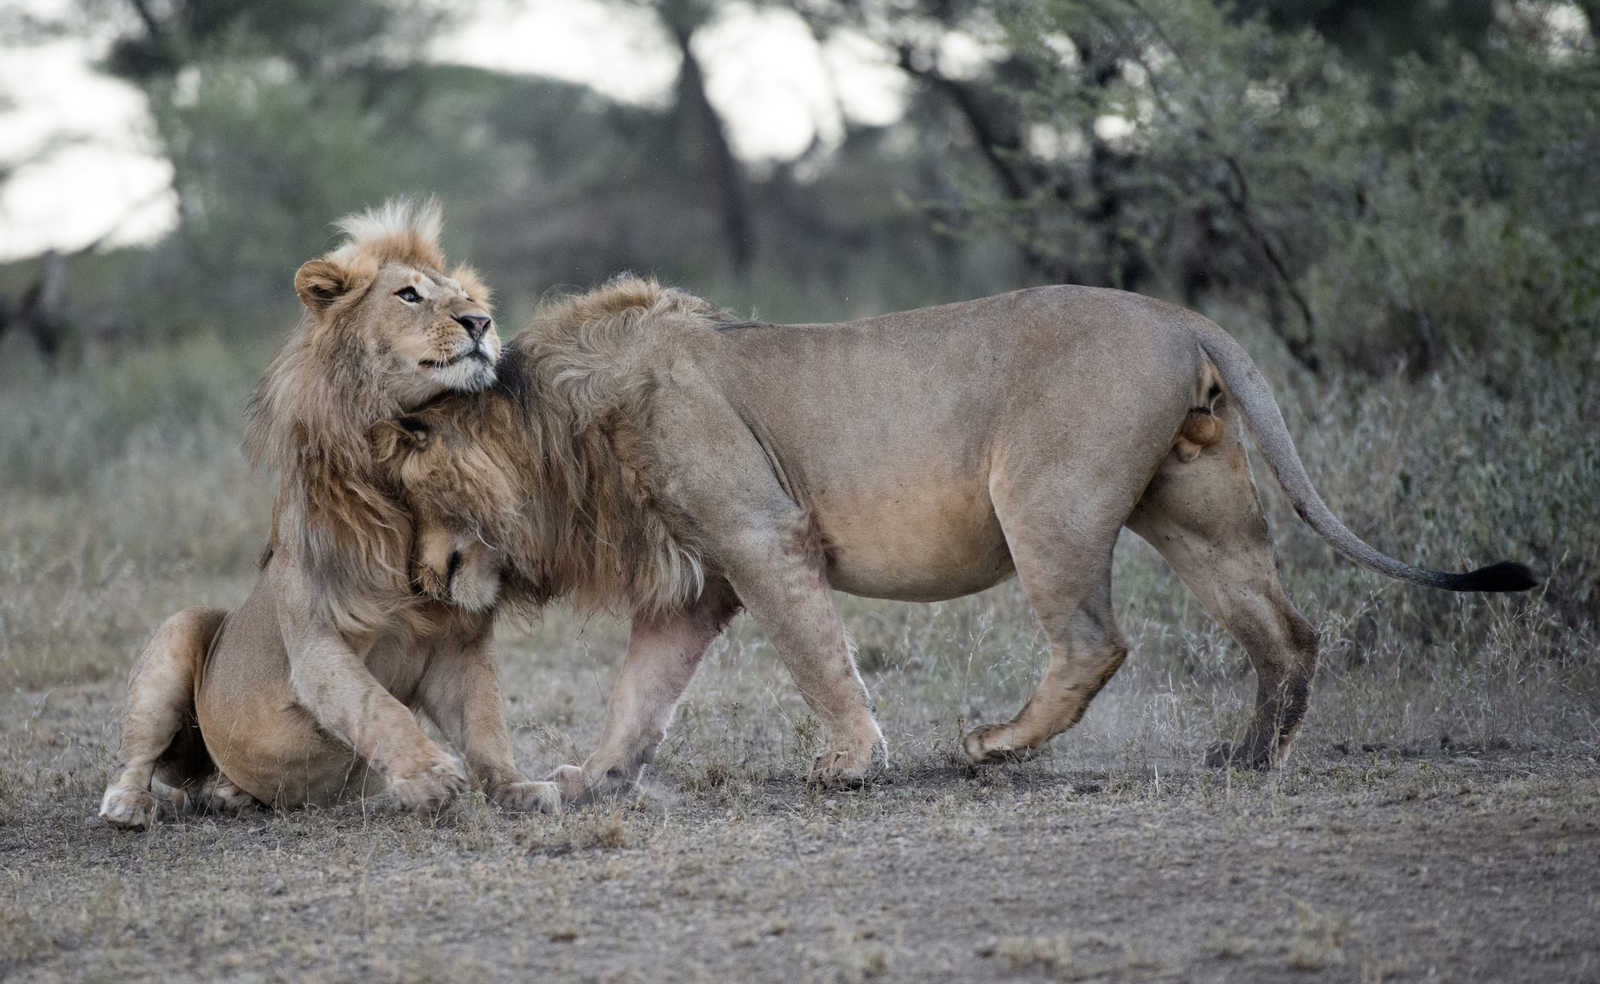 Two male lions greeting in Serengeti National Park, Tanzania, Africa. Image Credit: © Johncarnemolla | Dreamstime.com.